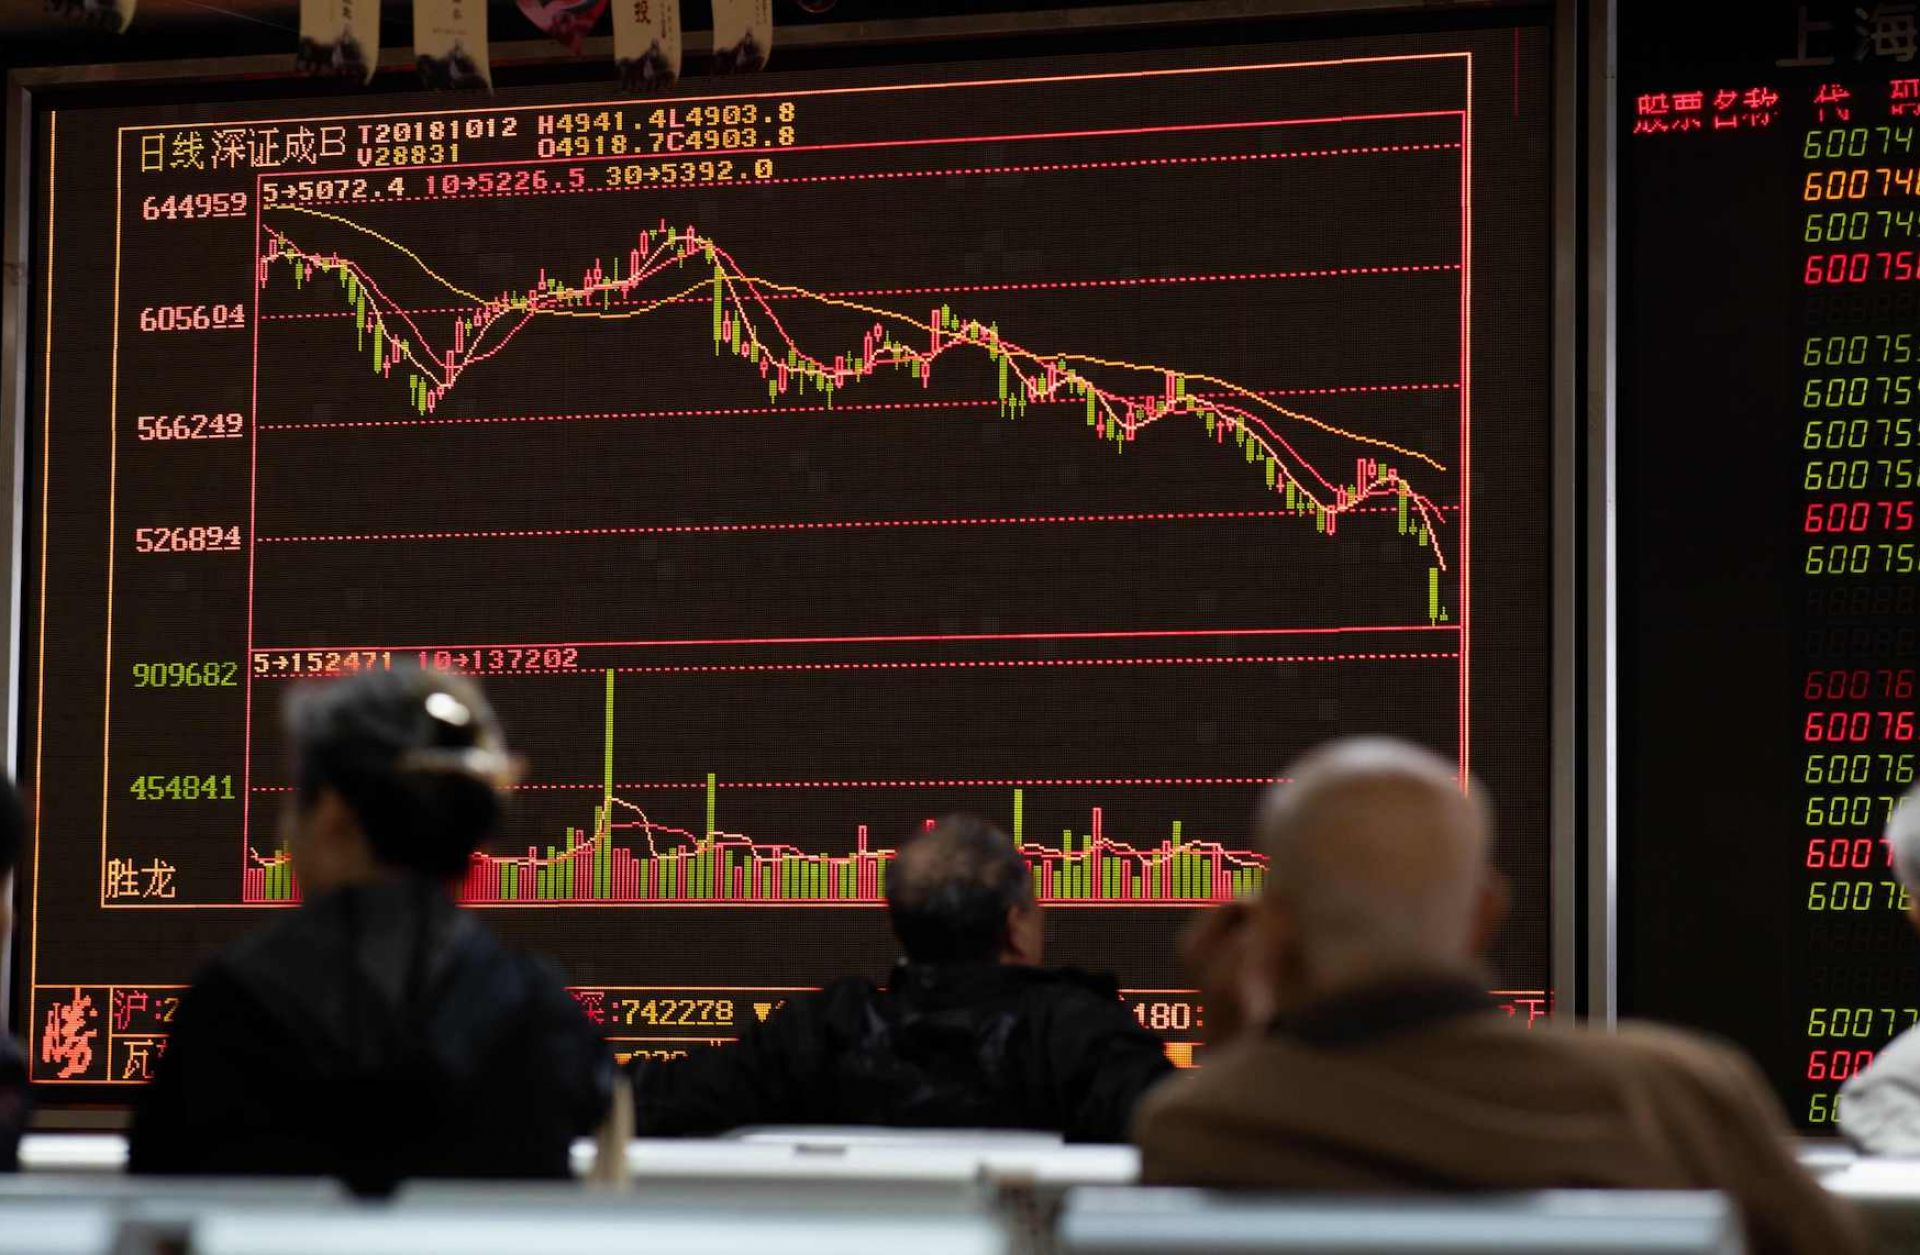 Investors watch stock price movements at a securities company in Beijing on Oct. 12.